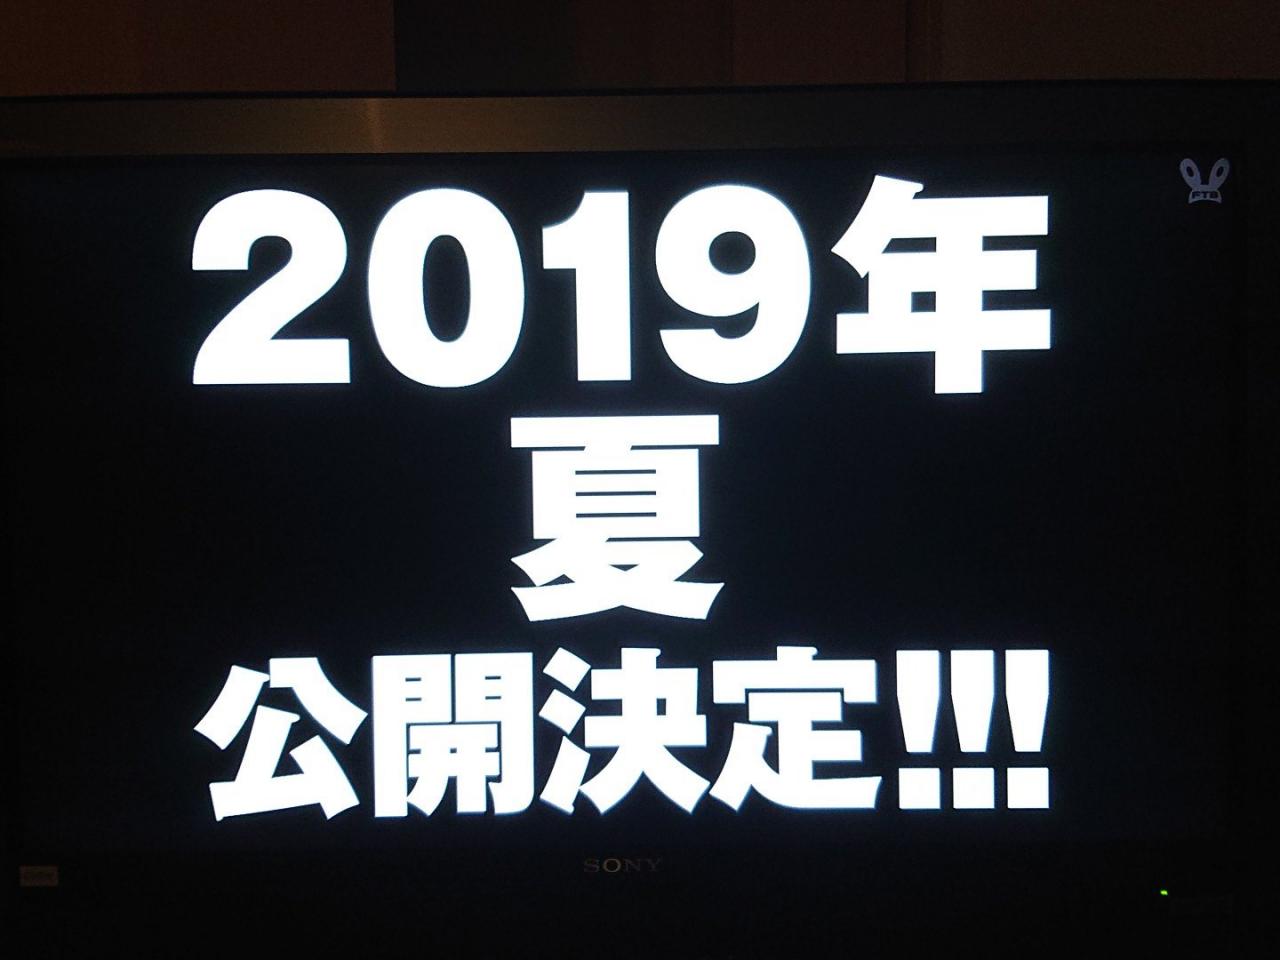 New One Piece Movie Hits Japanese Theaters in Summer of 2019